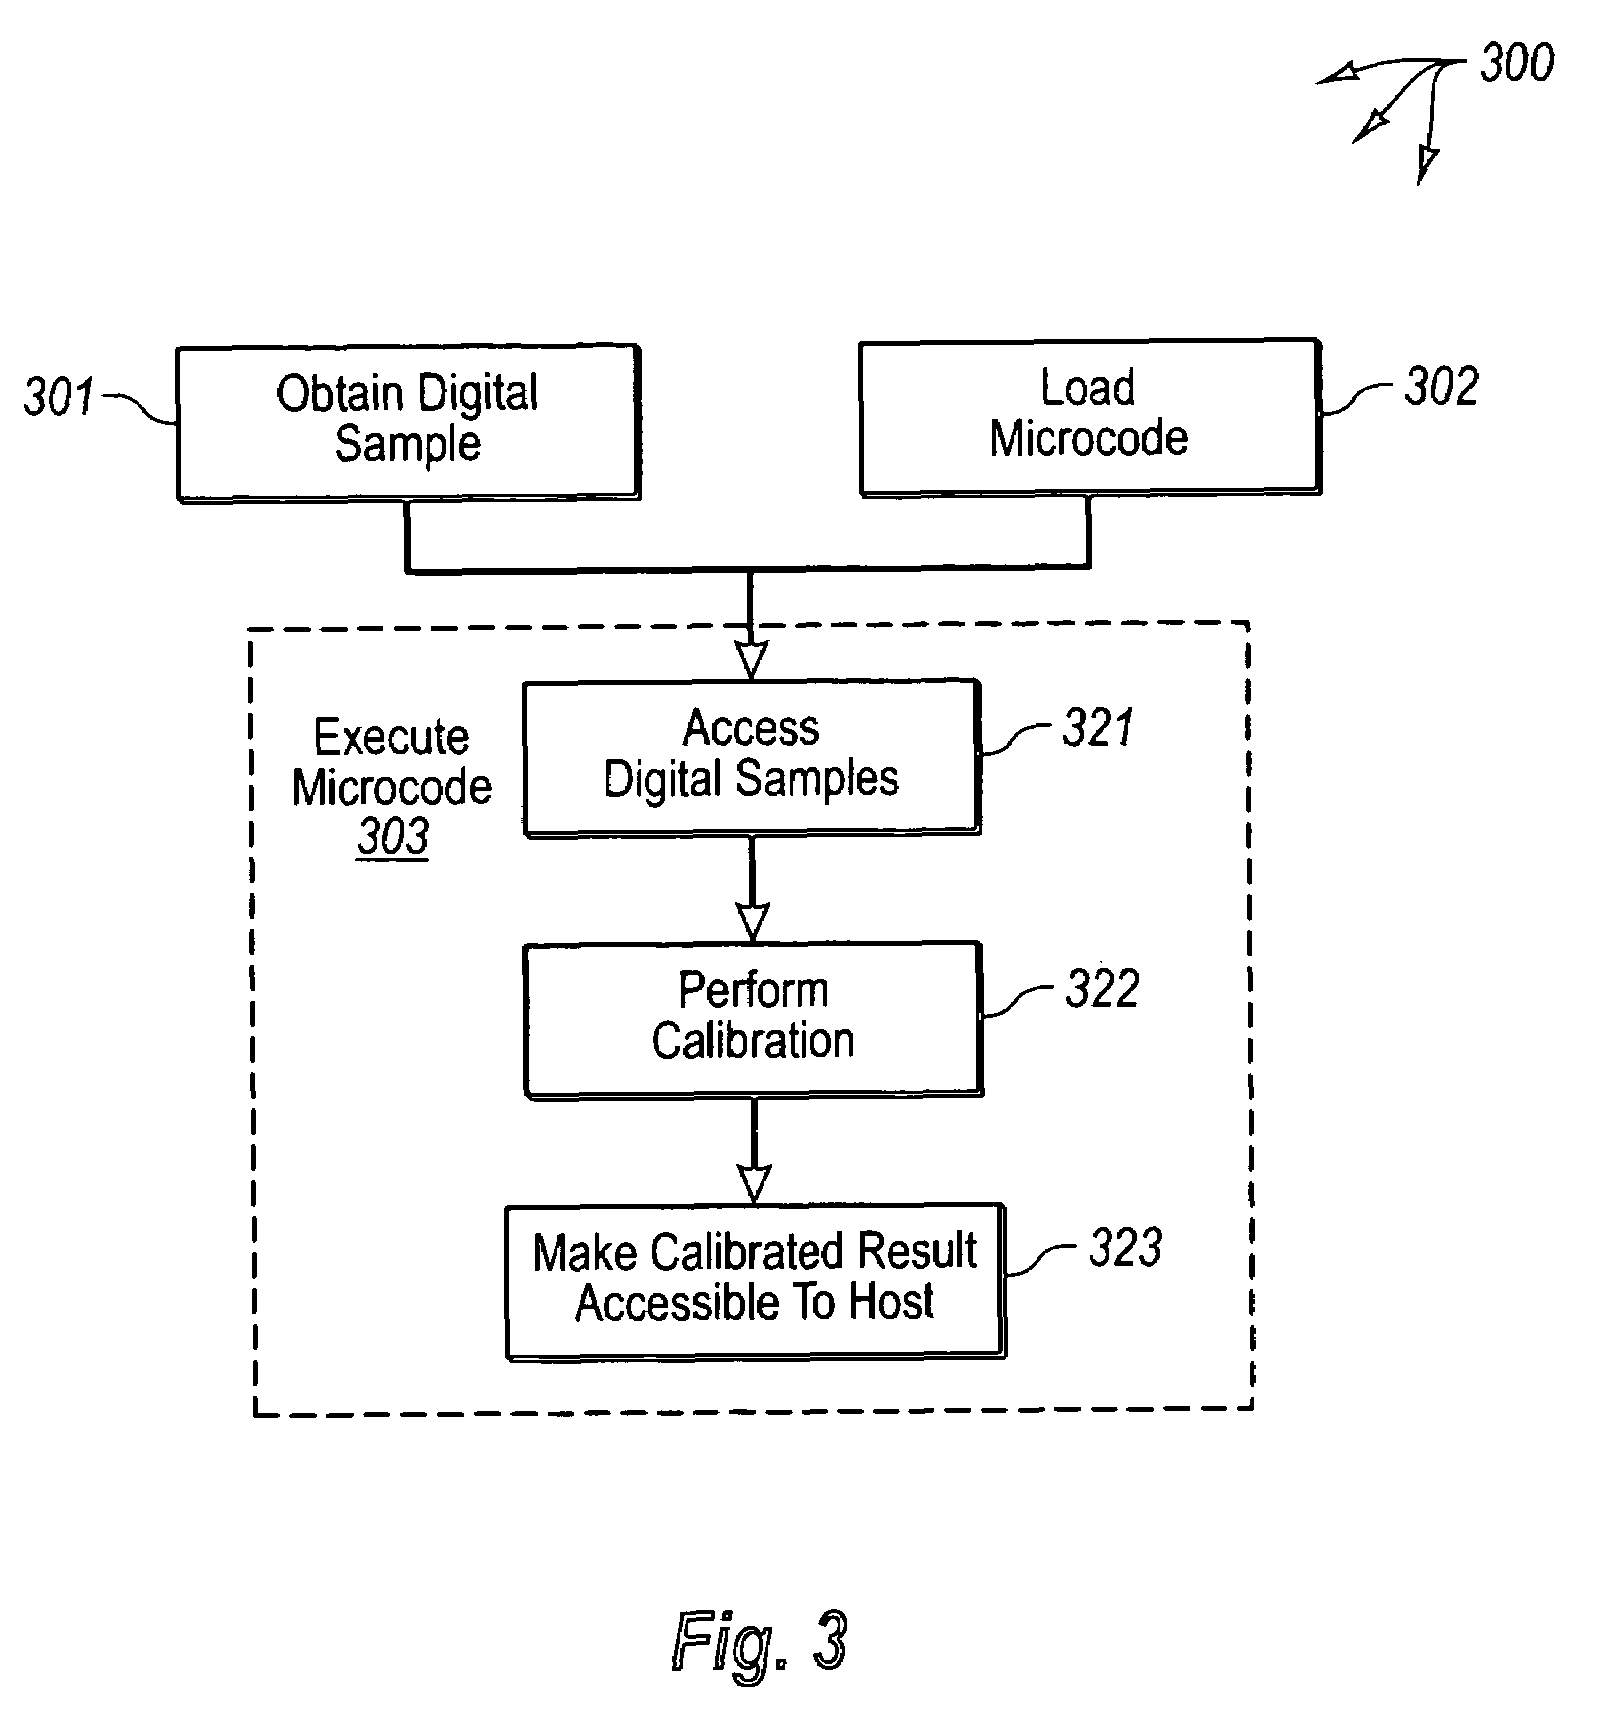 Calibration of digital diagnostics information in an optical transceiver prior to reporting to host